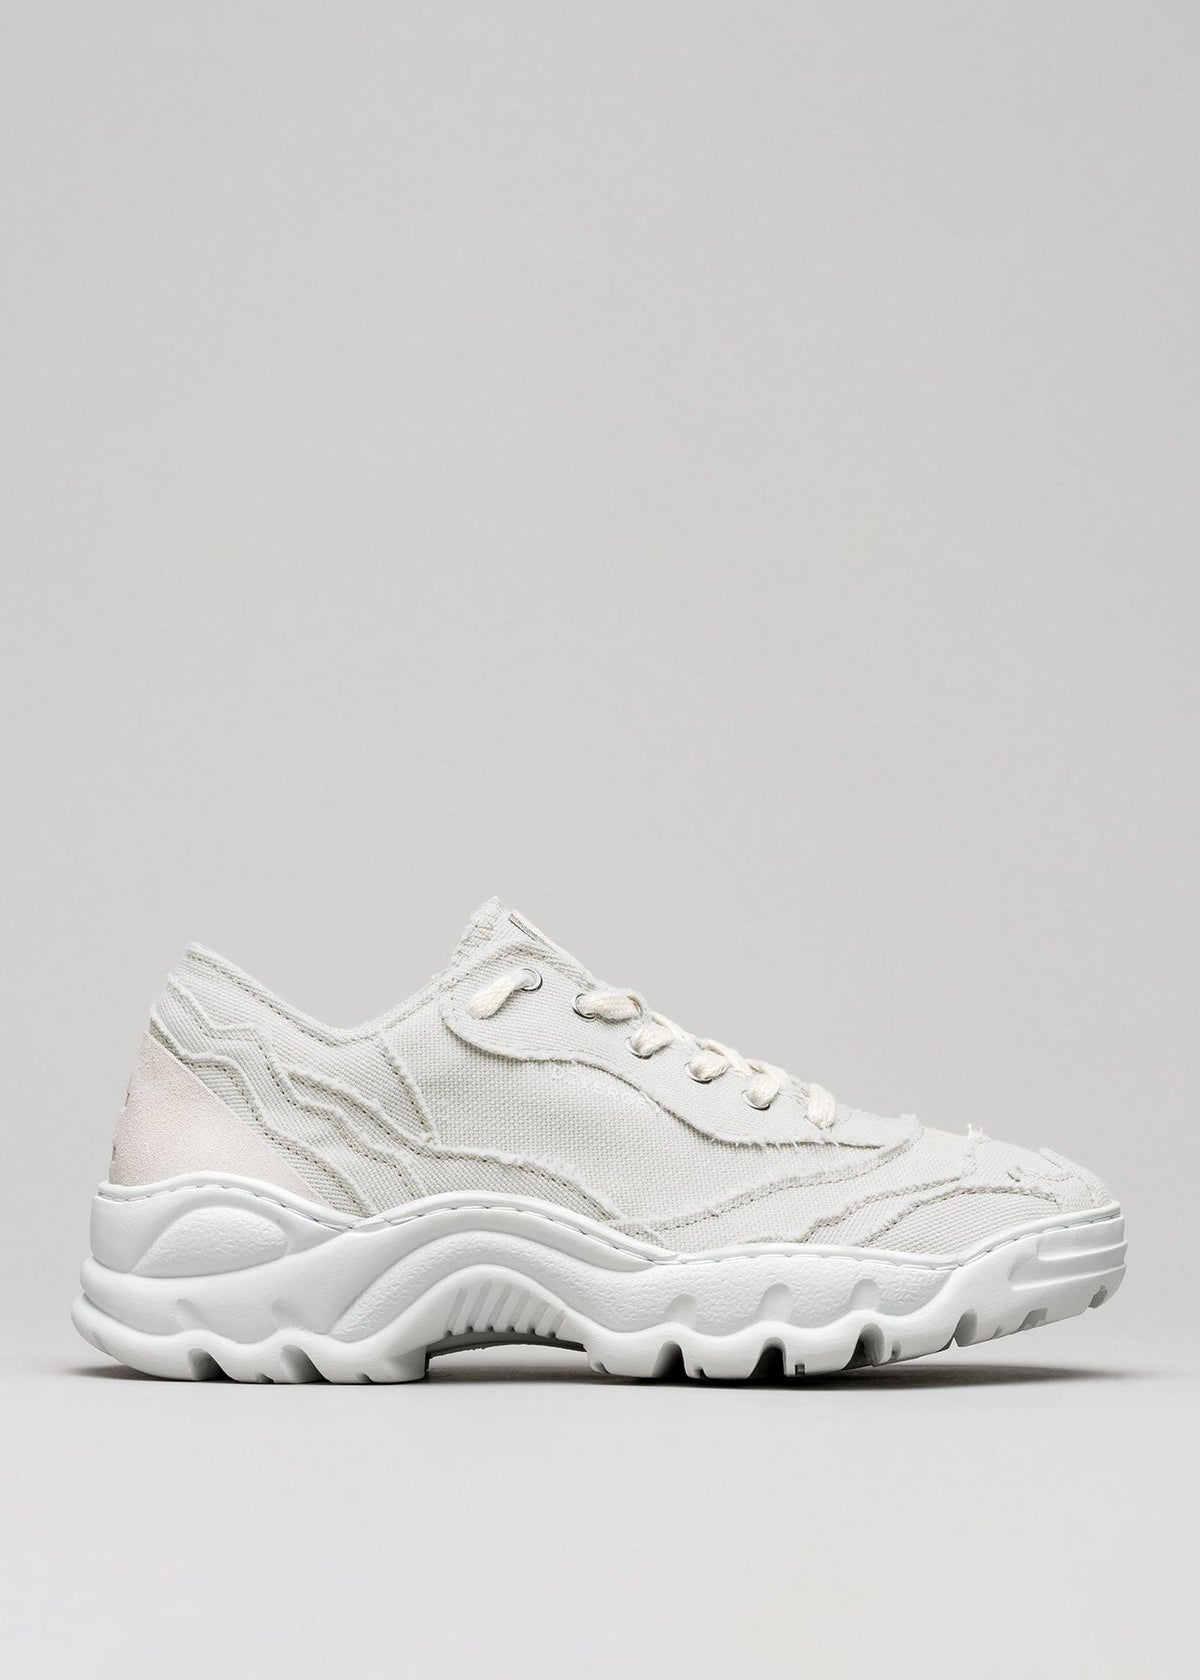 A single Landscape Canvas White athletic sneaker with chunky soles, displayed against a gray background.